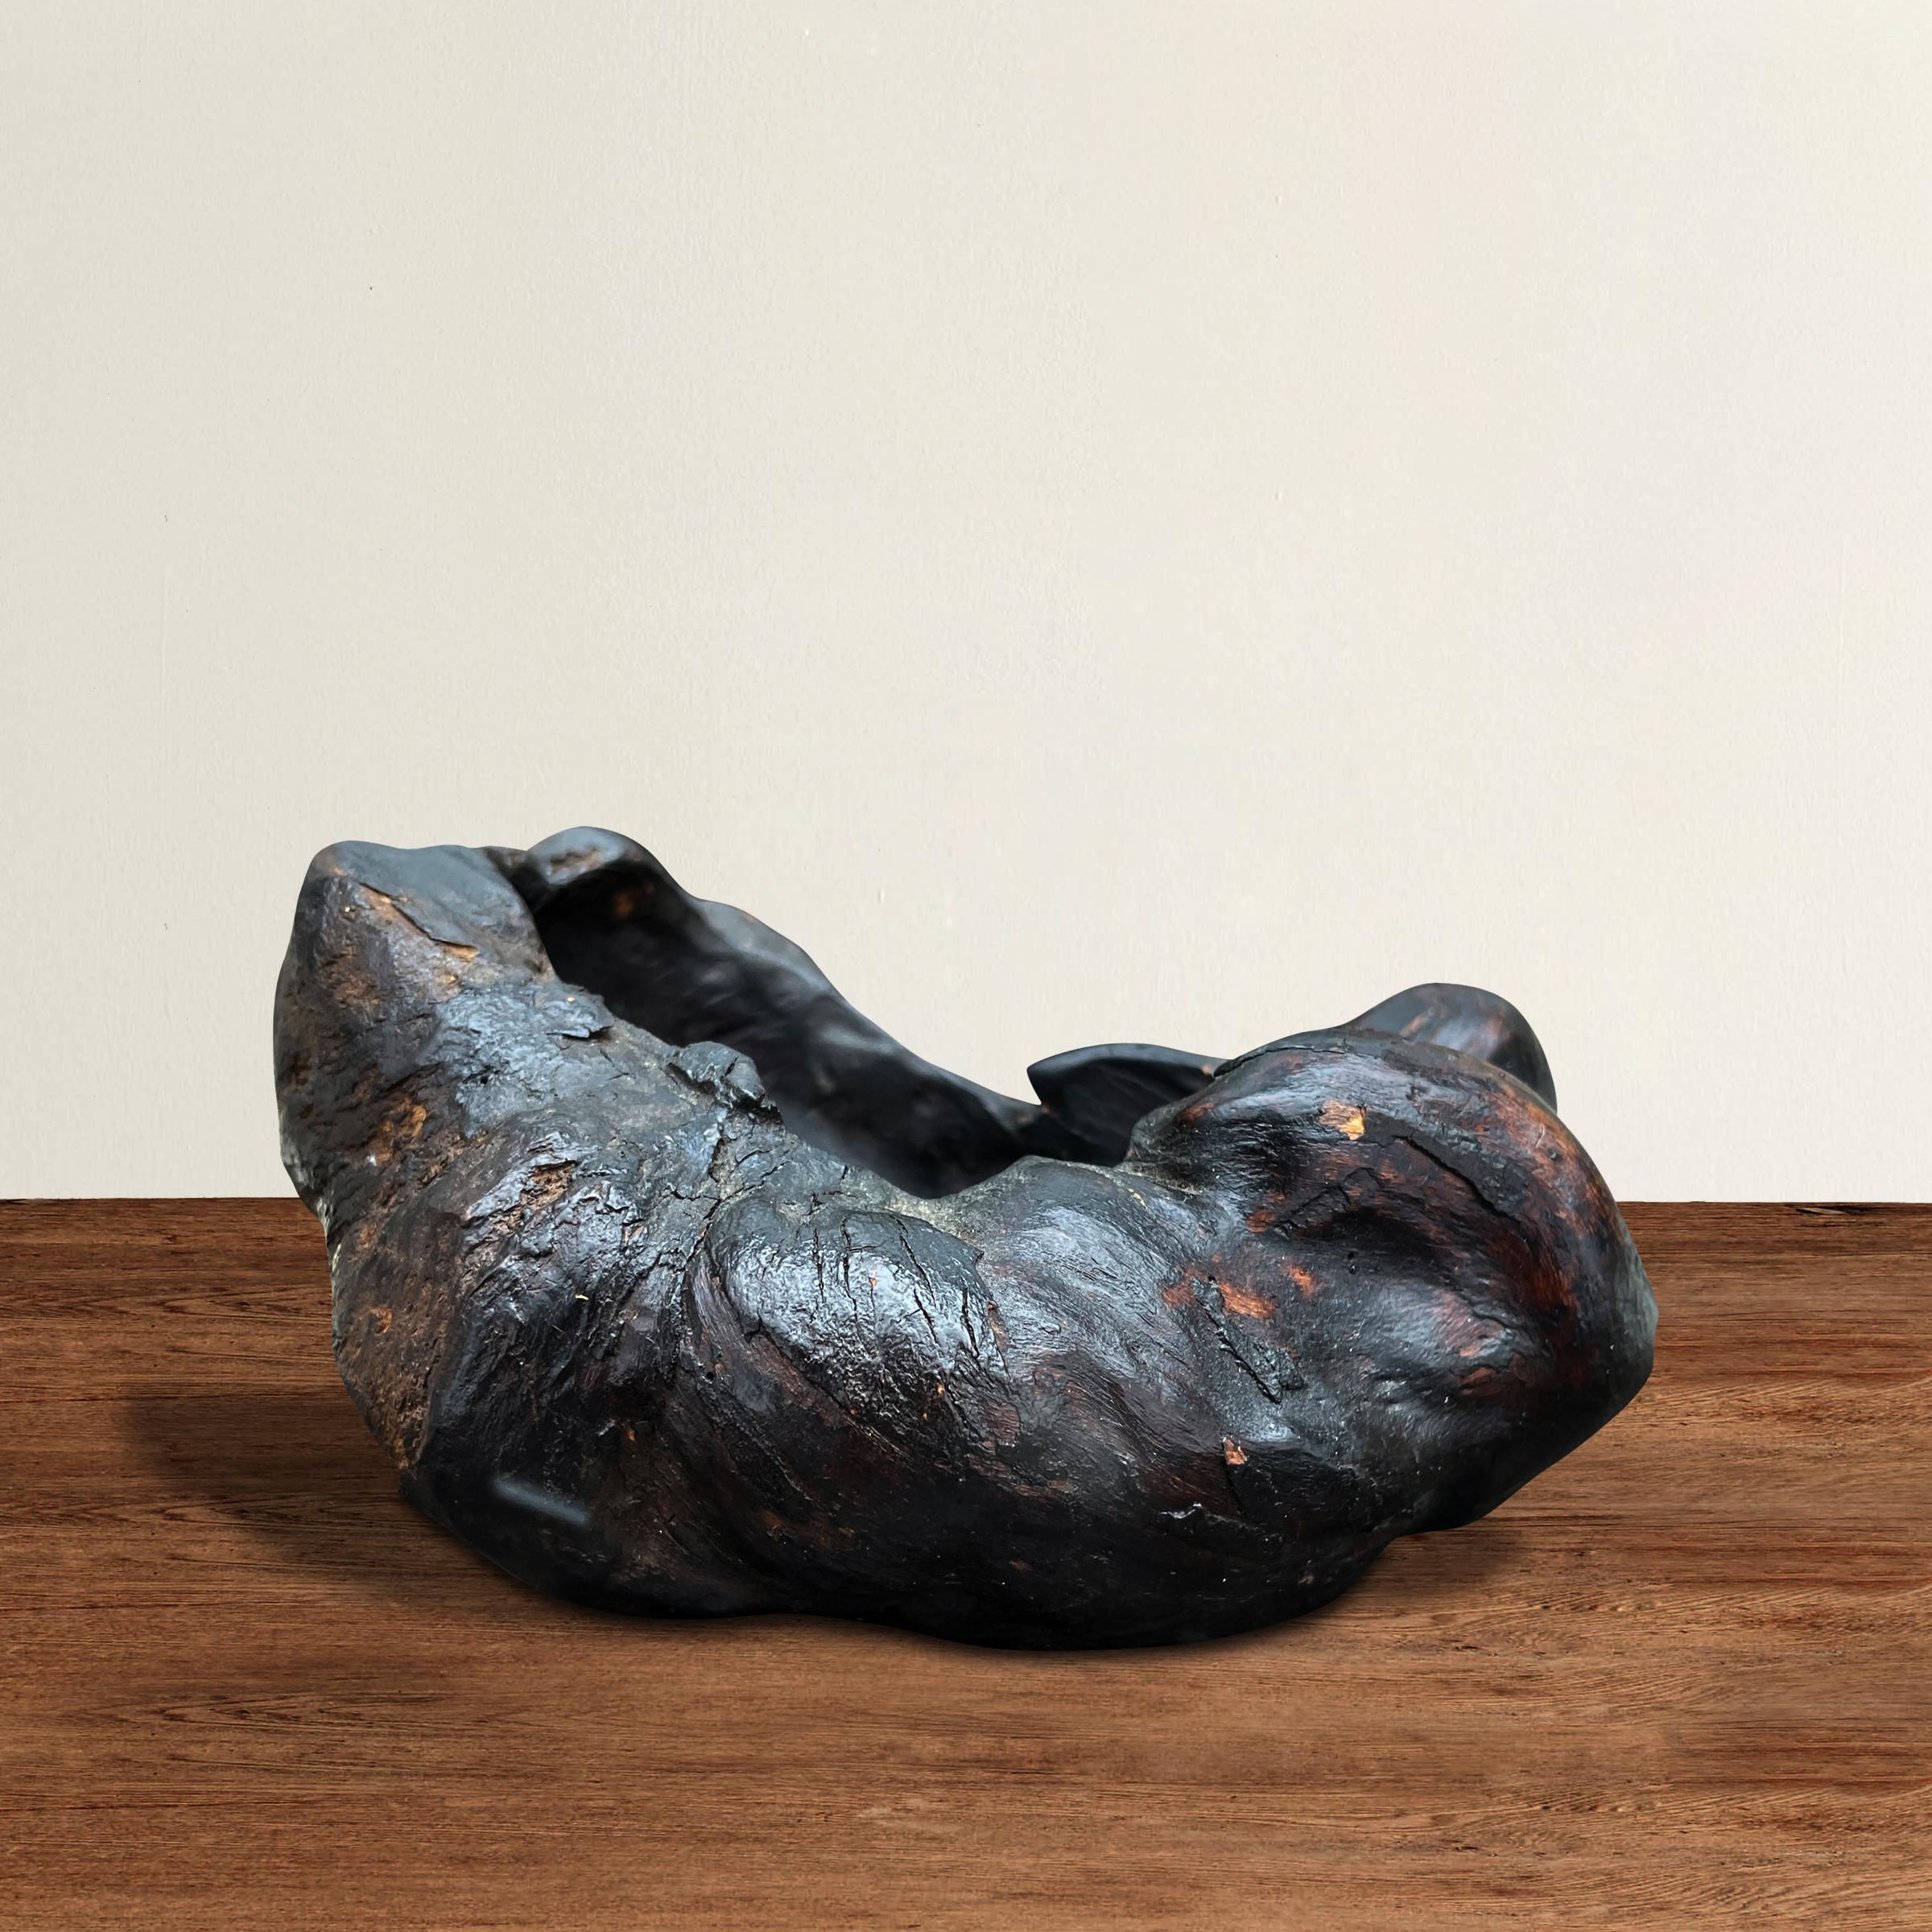 A small burl bowl, possibly Chinese, with a wild organic form and its original dark lacquer finish. Perfect for holding your key, pocket change, or to house any vices you wish.